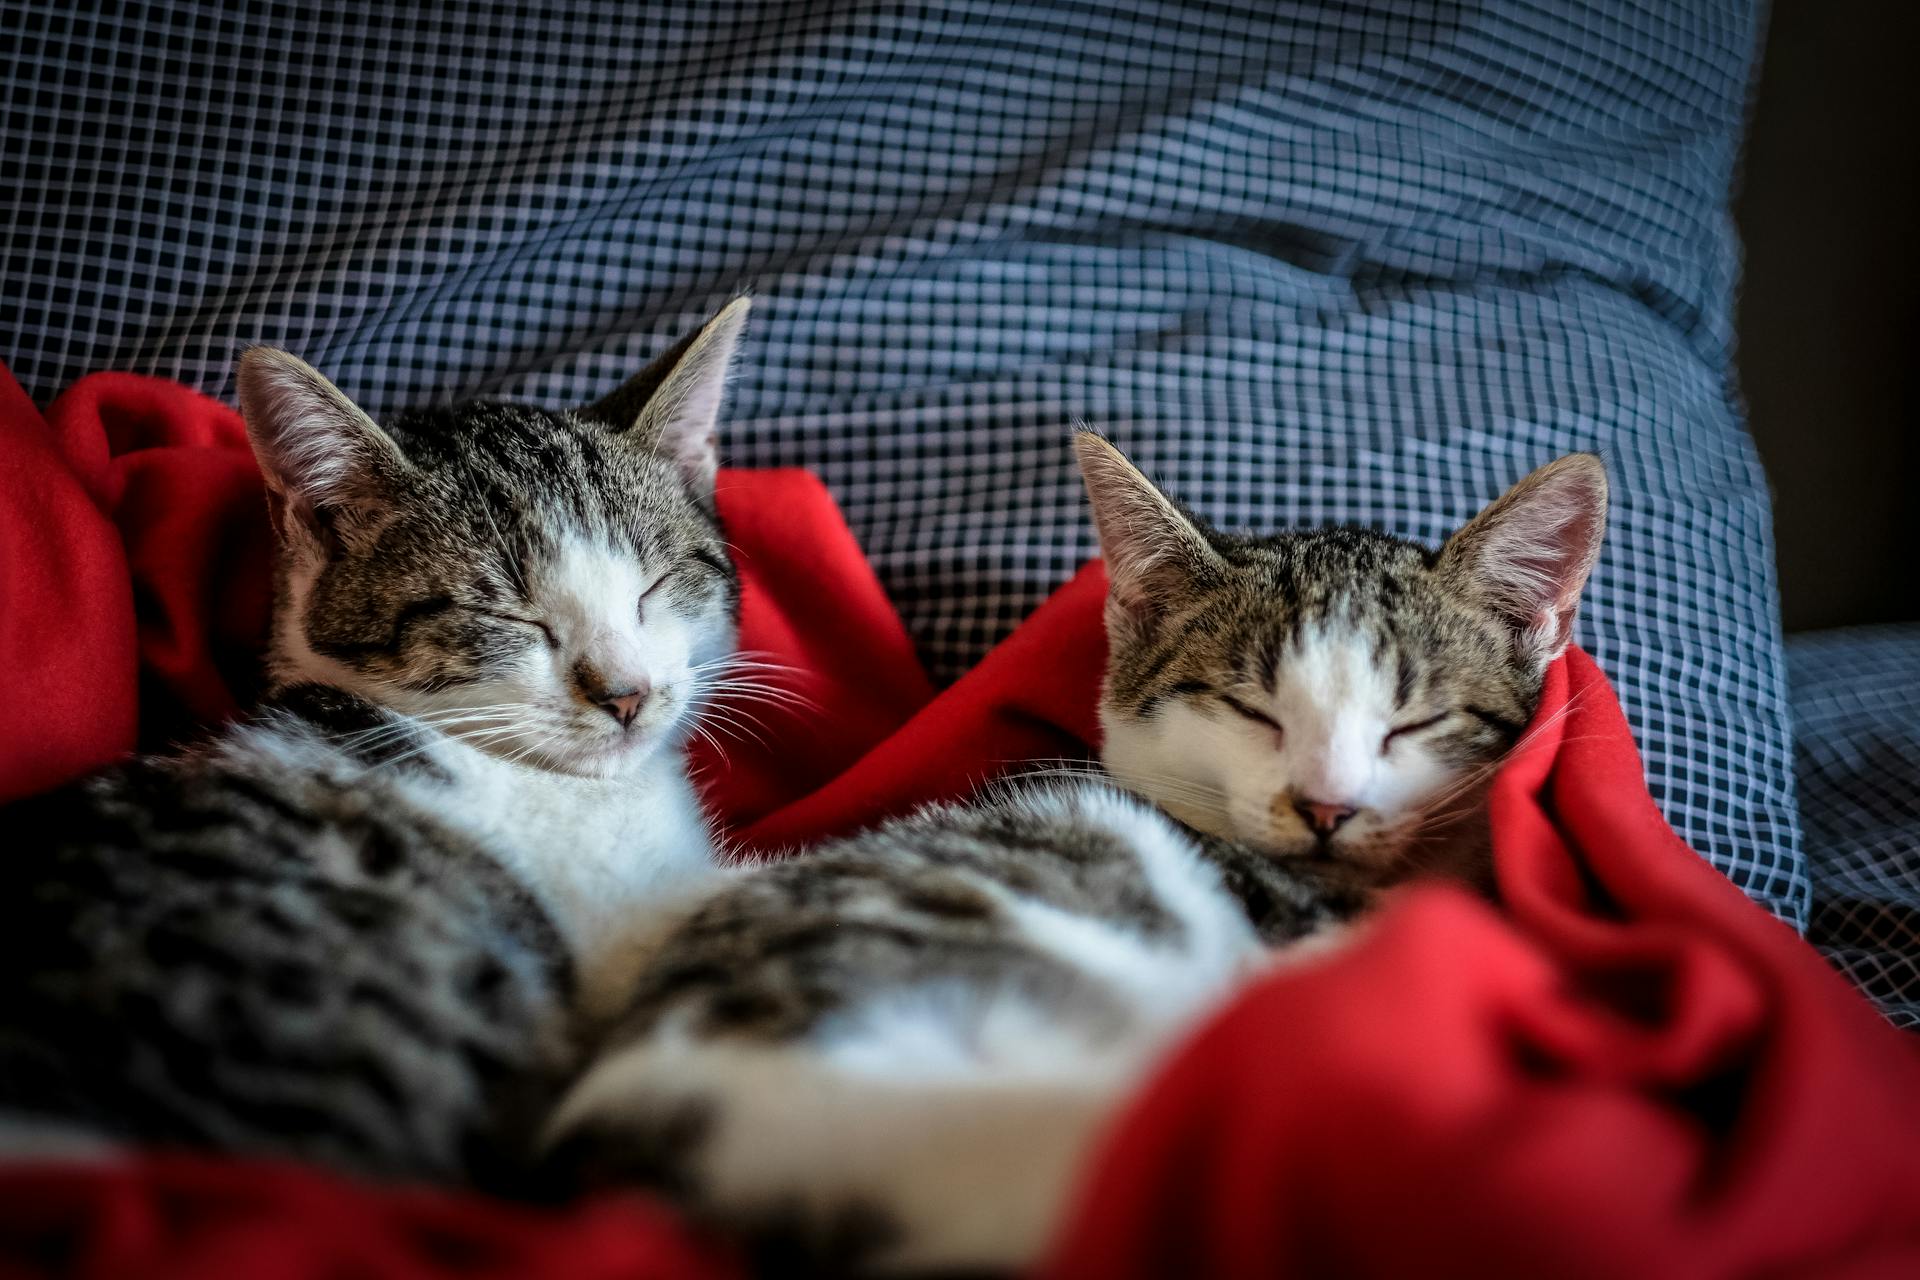 Two cats sleeping on a red blanket